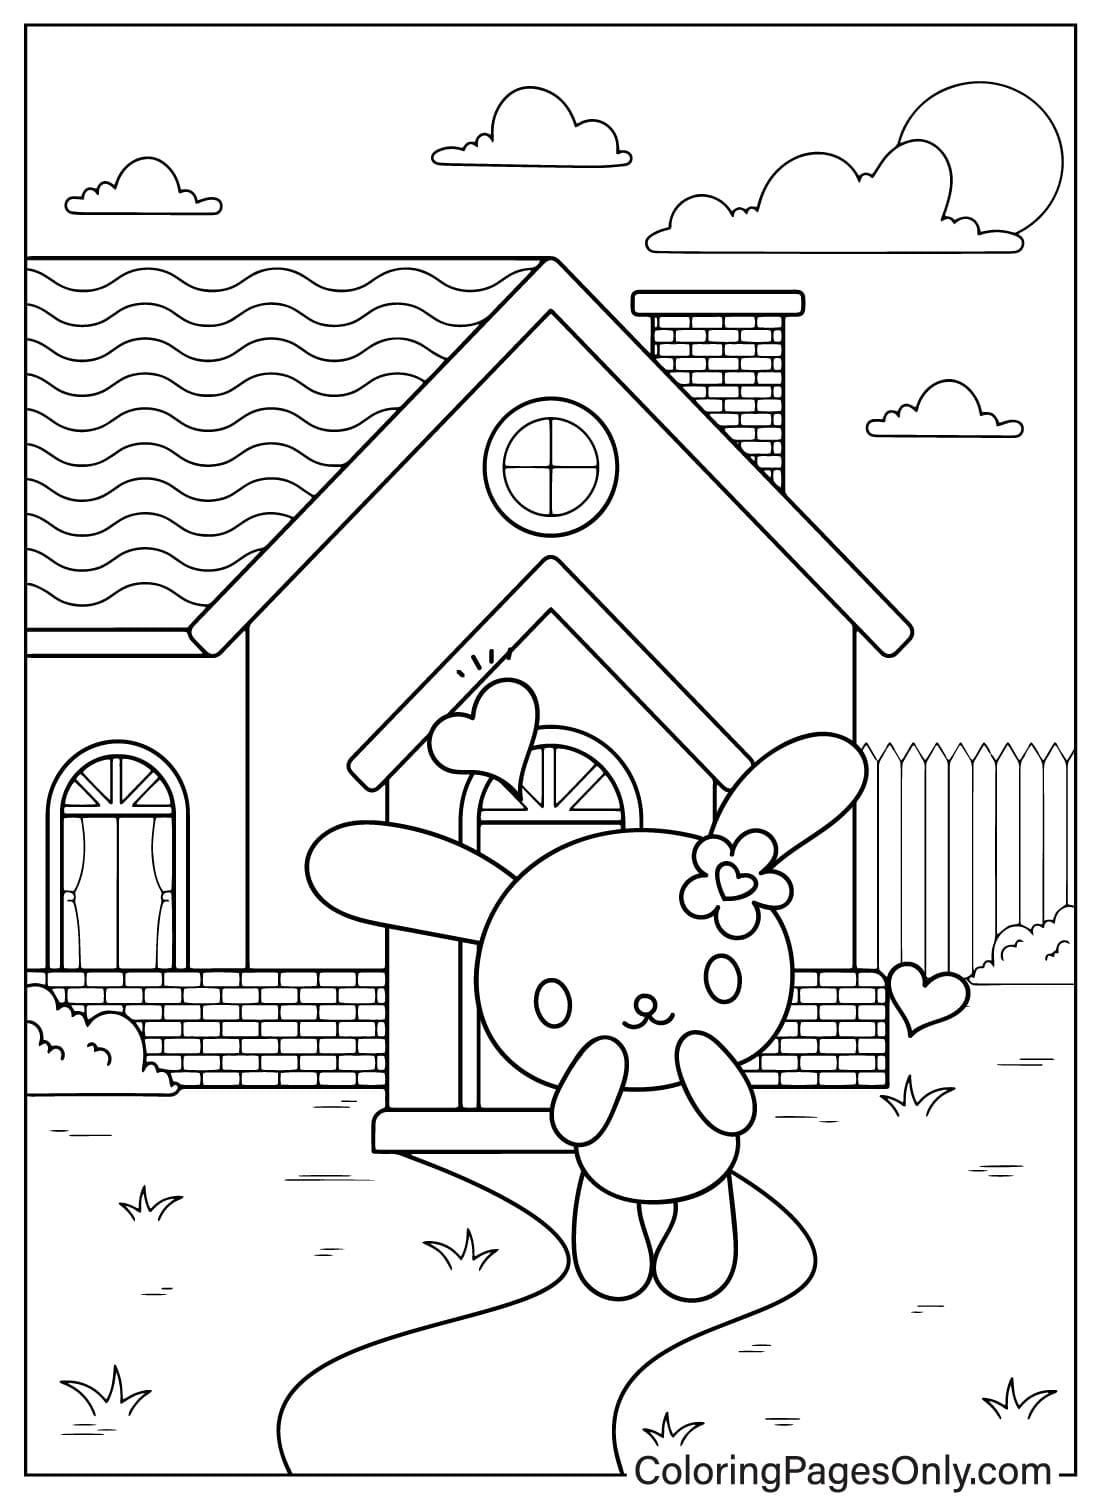 Pictures Usahana Coloring Page from Usahana